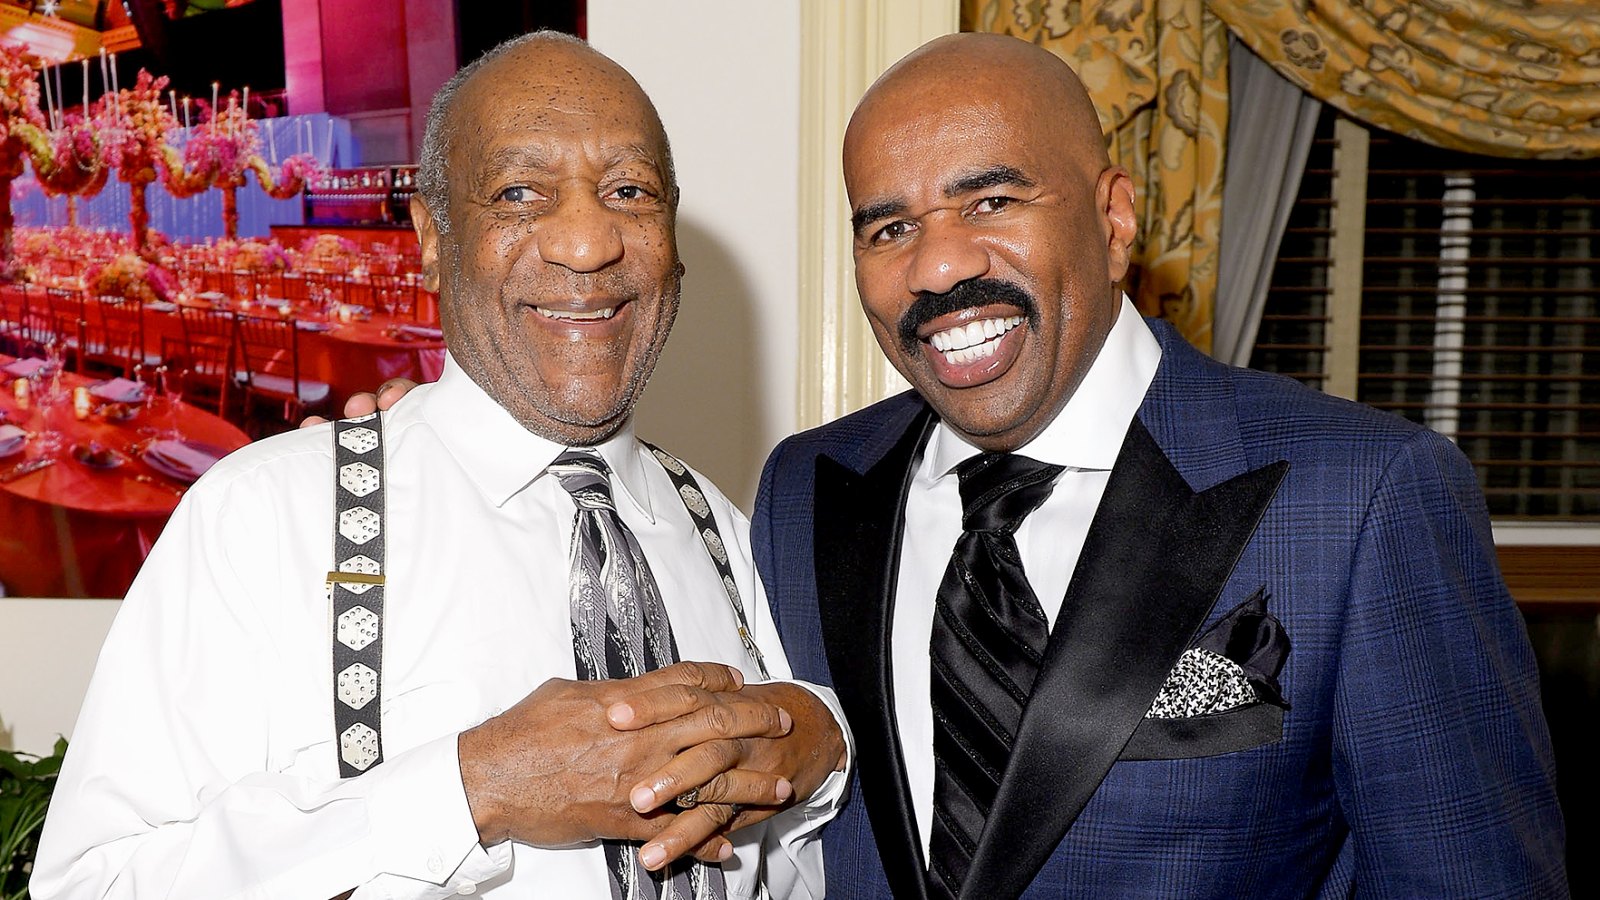 Bill Cosby and Steve Harvey attend Screen Gems Presents The Steve & Marjorie Harvey Foundation Gala at Cipriani Wall Street on May 14, 2012 in New York City.